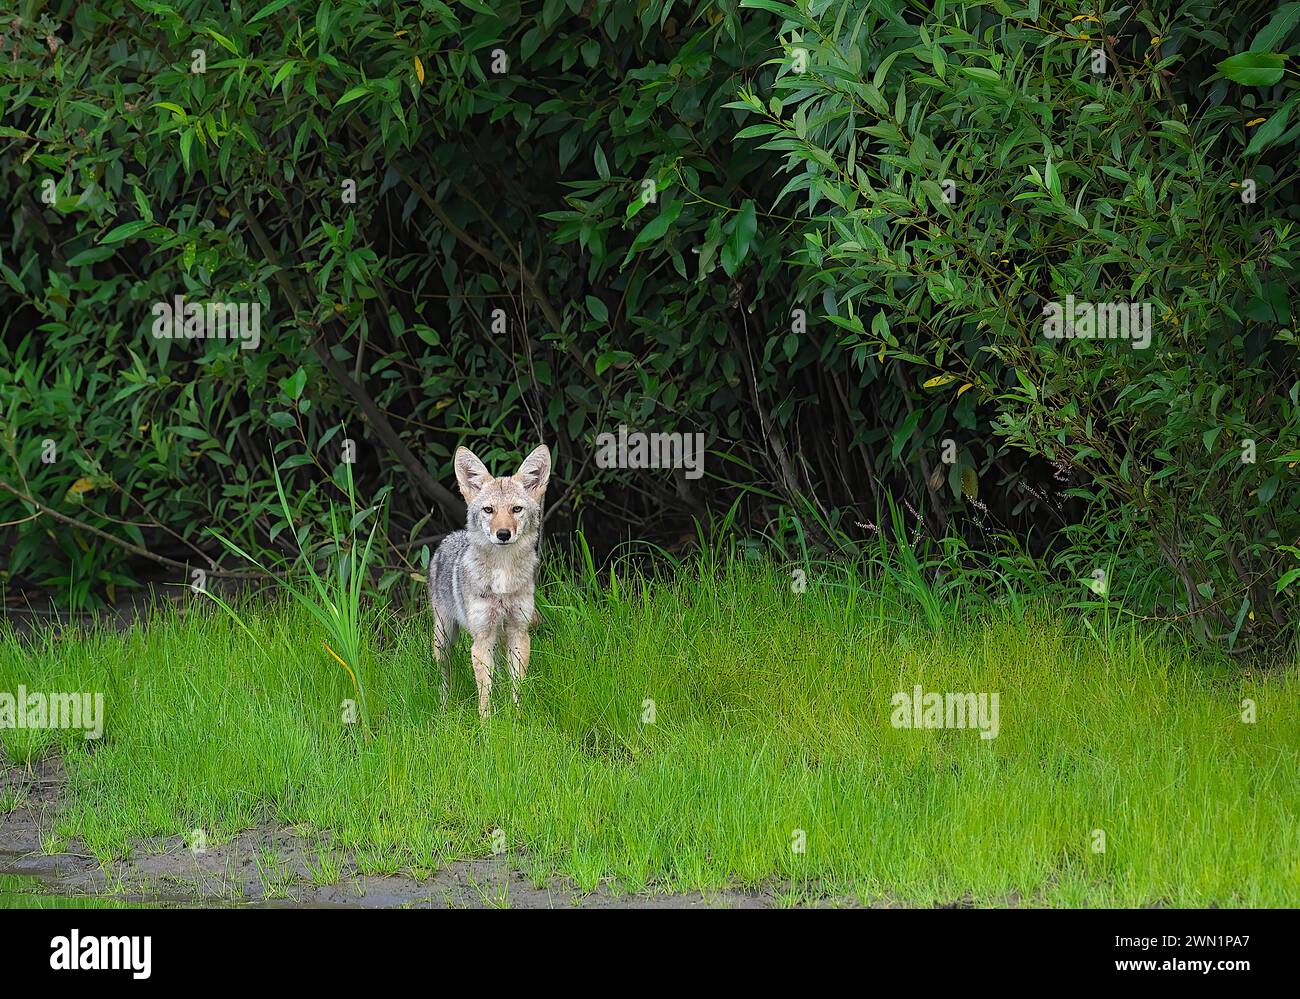 Coyote (Canis latrans) - standing facing camera in grassy area of an urban park - Pacific Northwest, Canada. Stock Photo